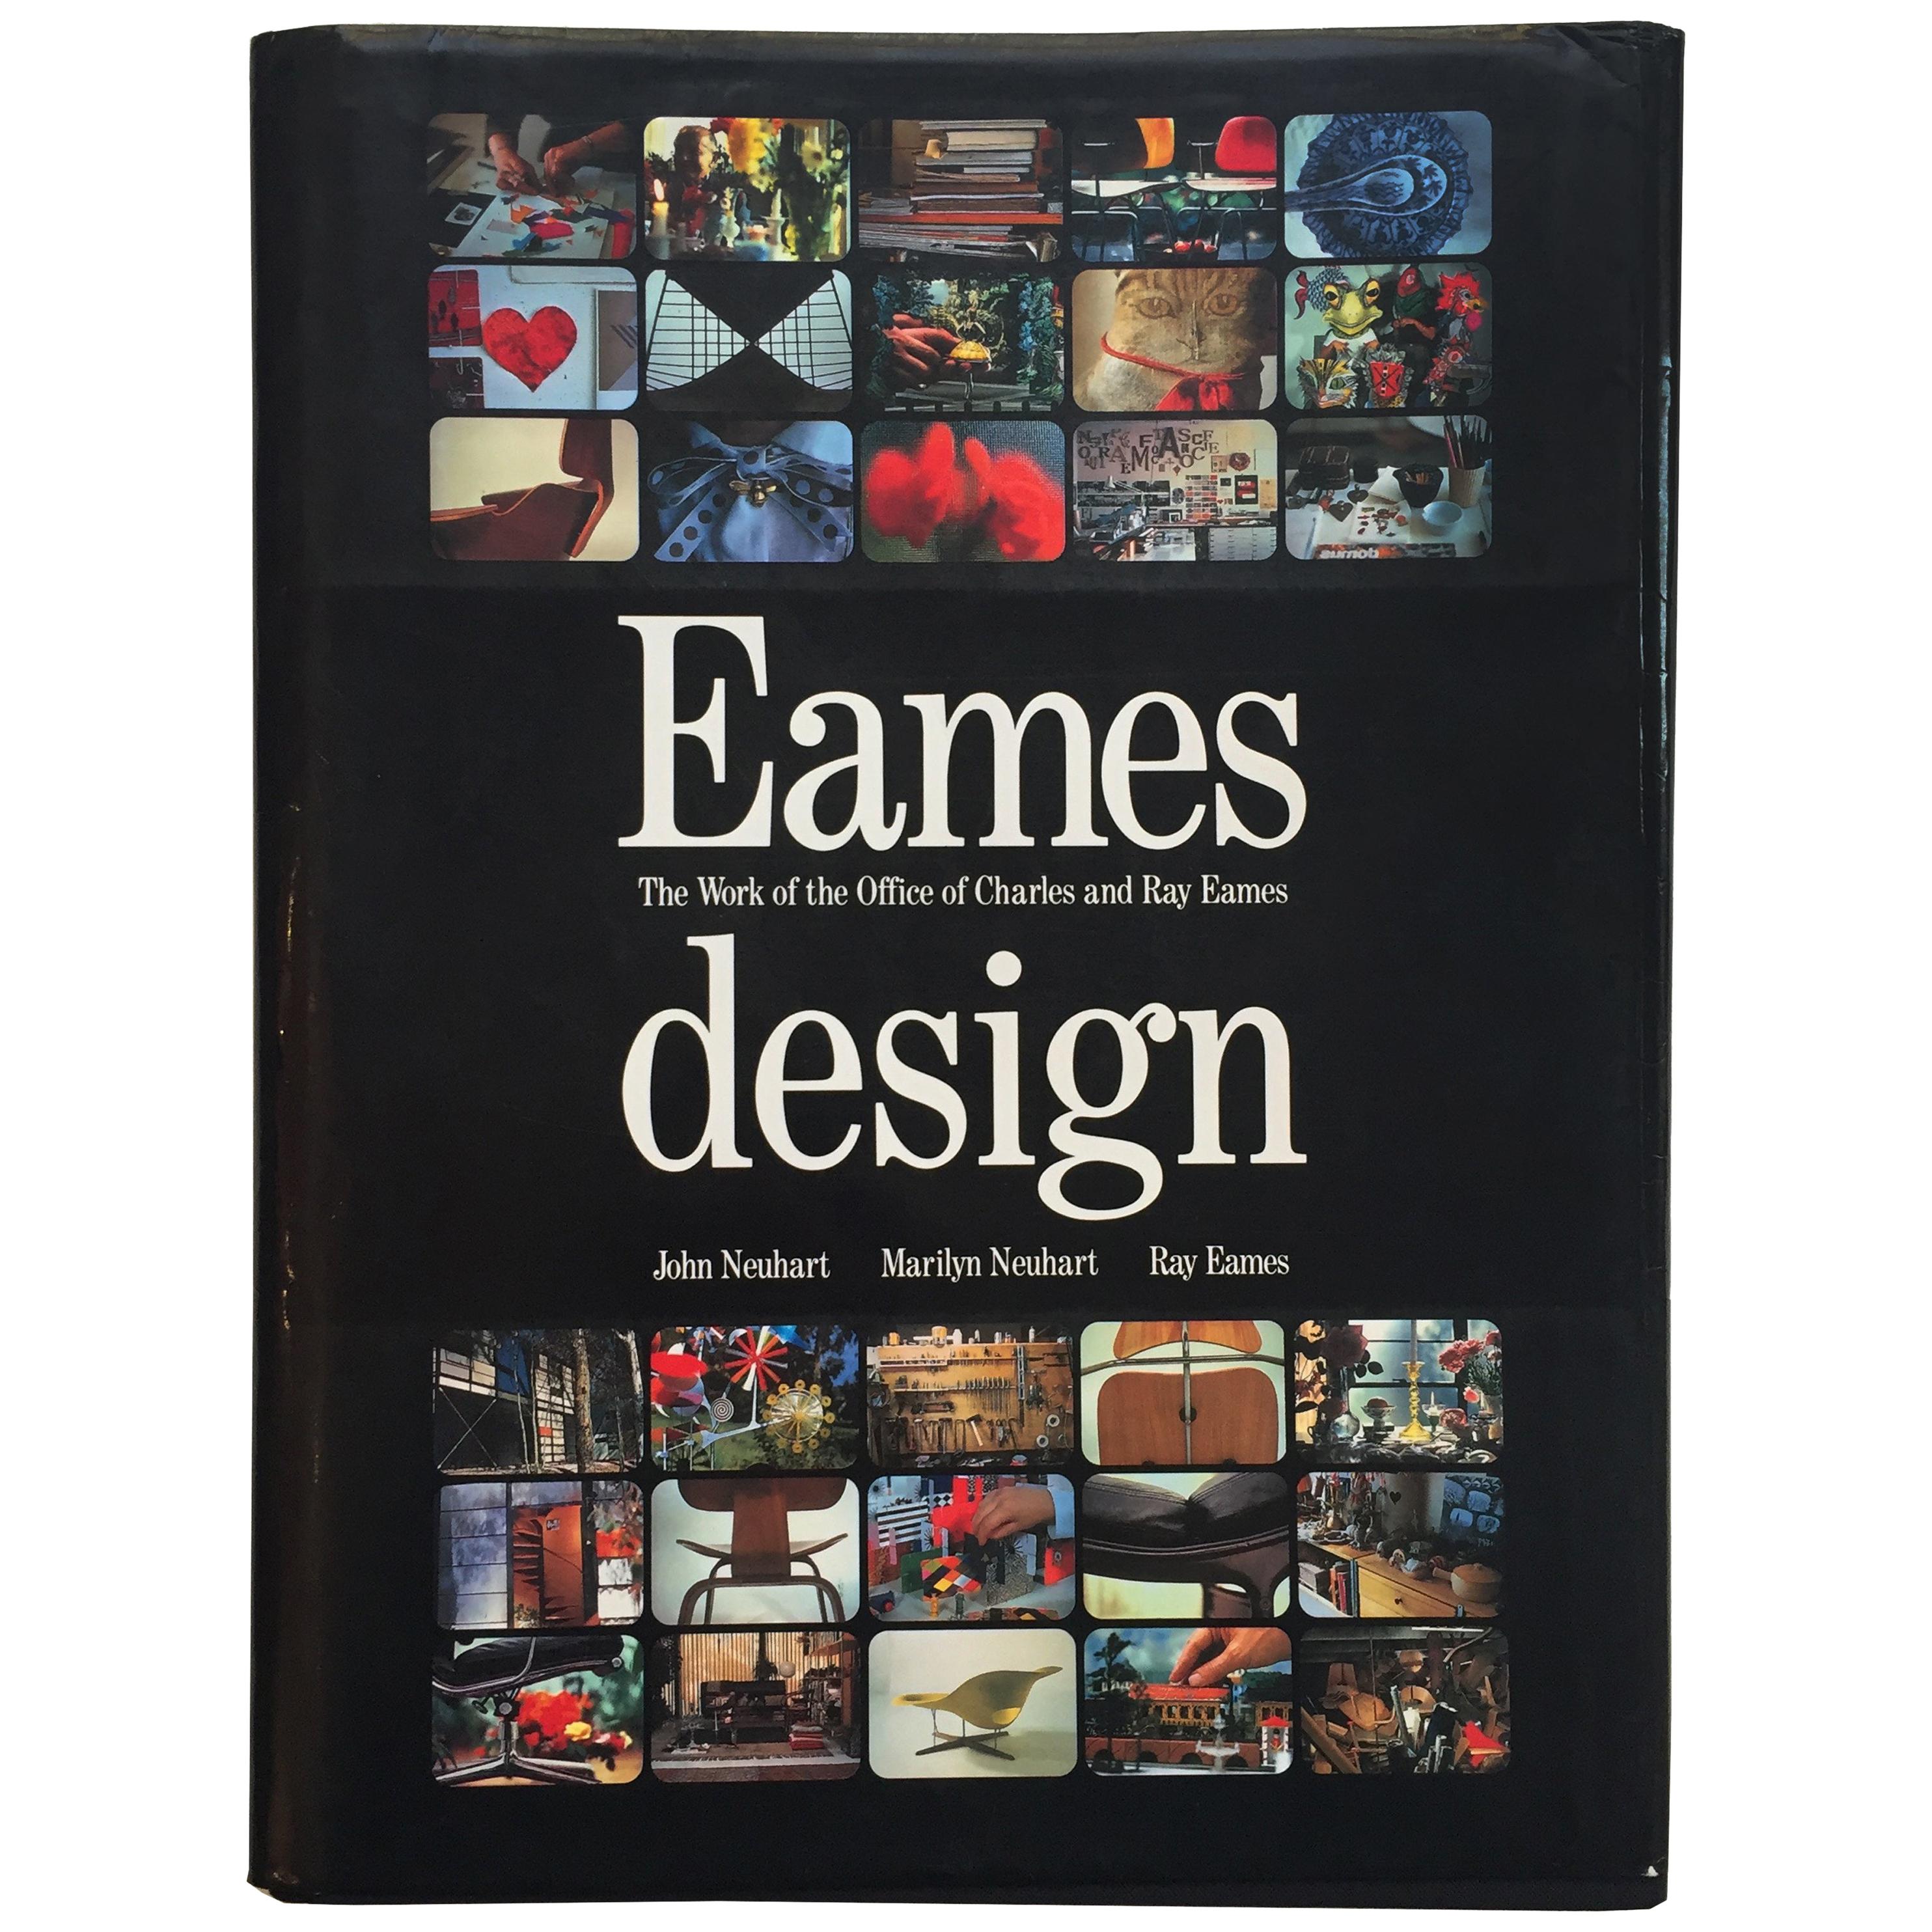 Eames Design: The Work of the Office of Charles and Ray Eames – Neuhart – 1994